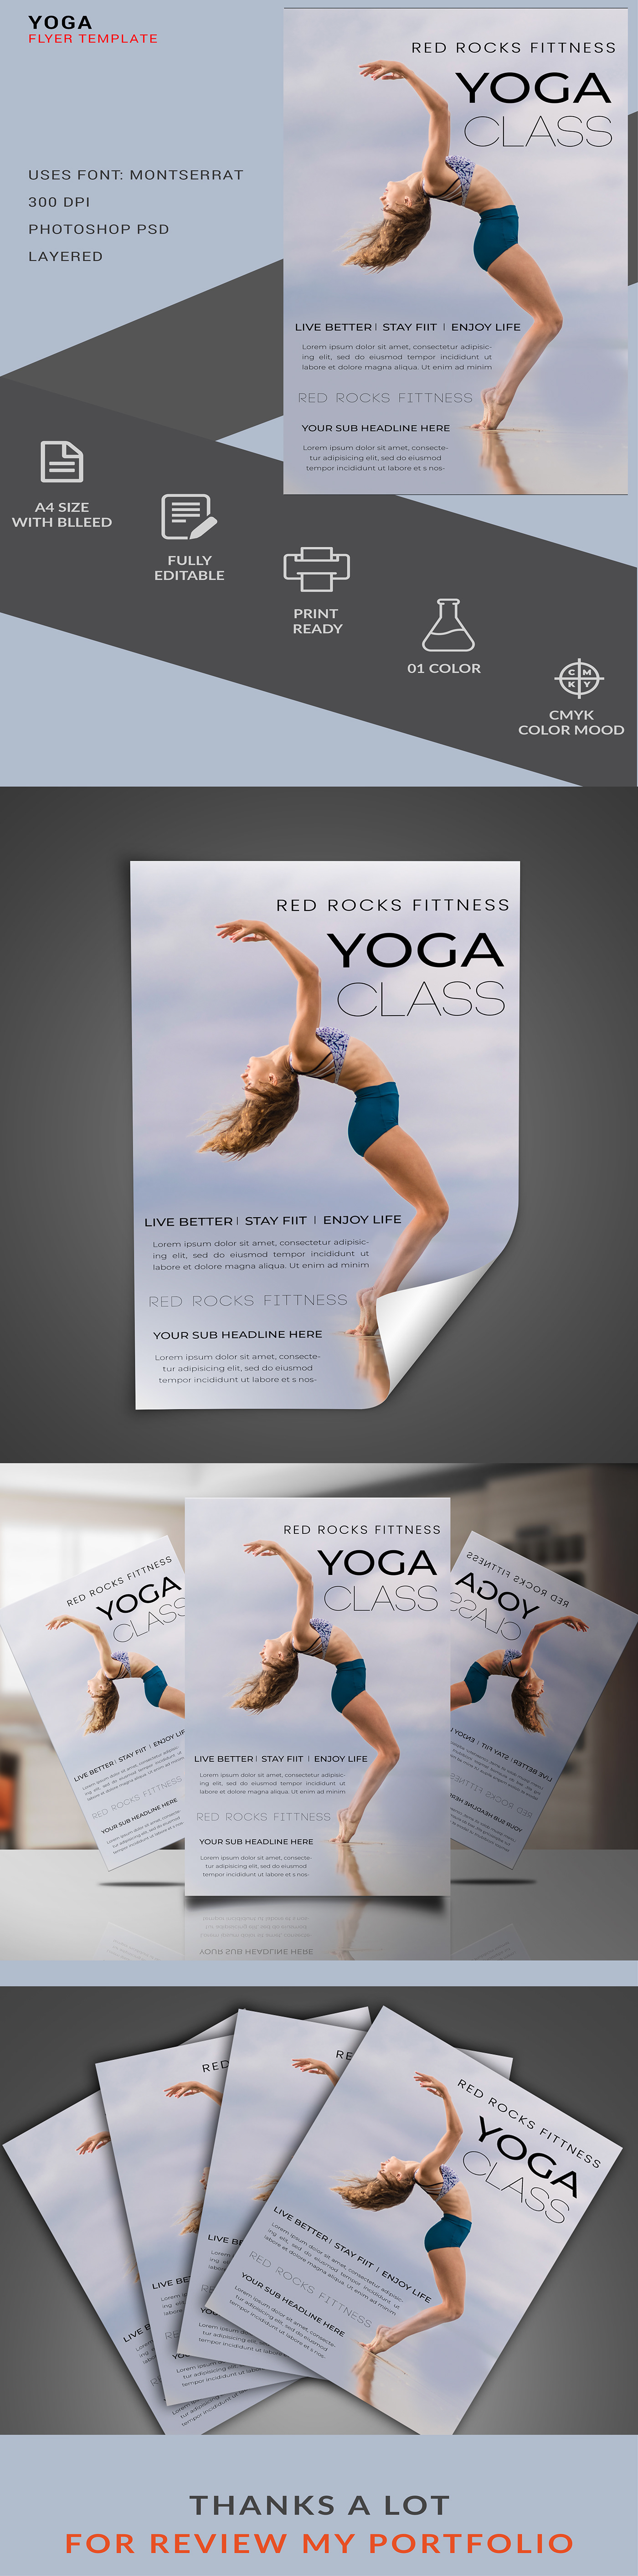 Yoga flyer design sports gym Event corporate graphic